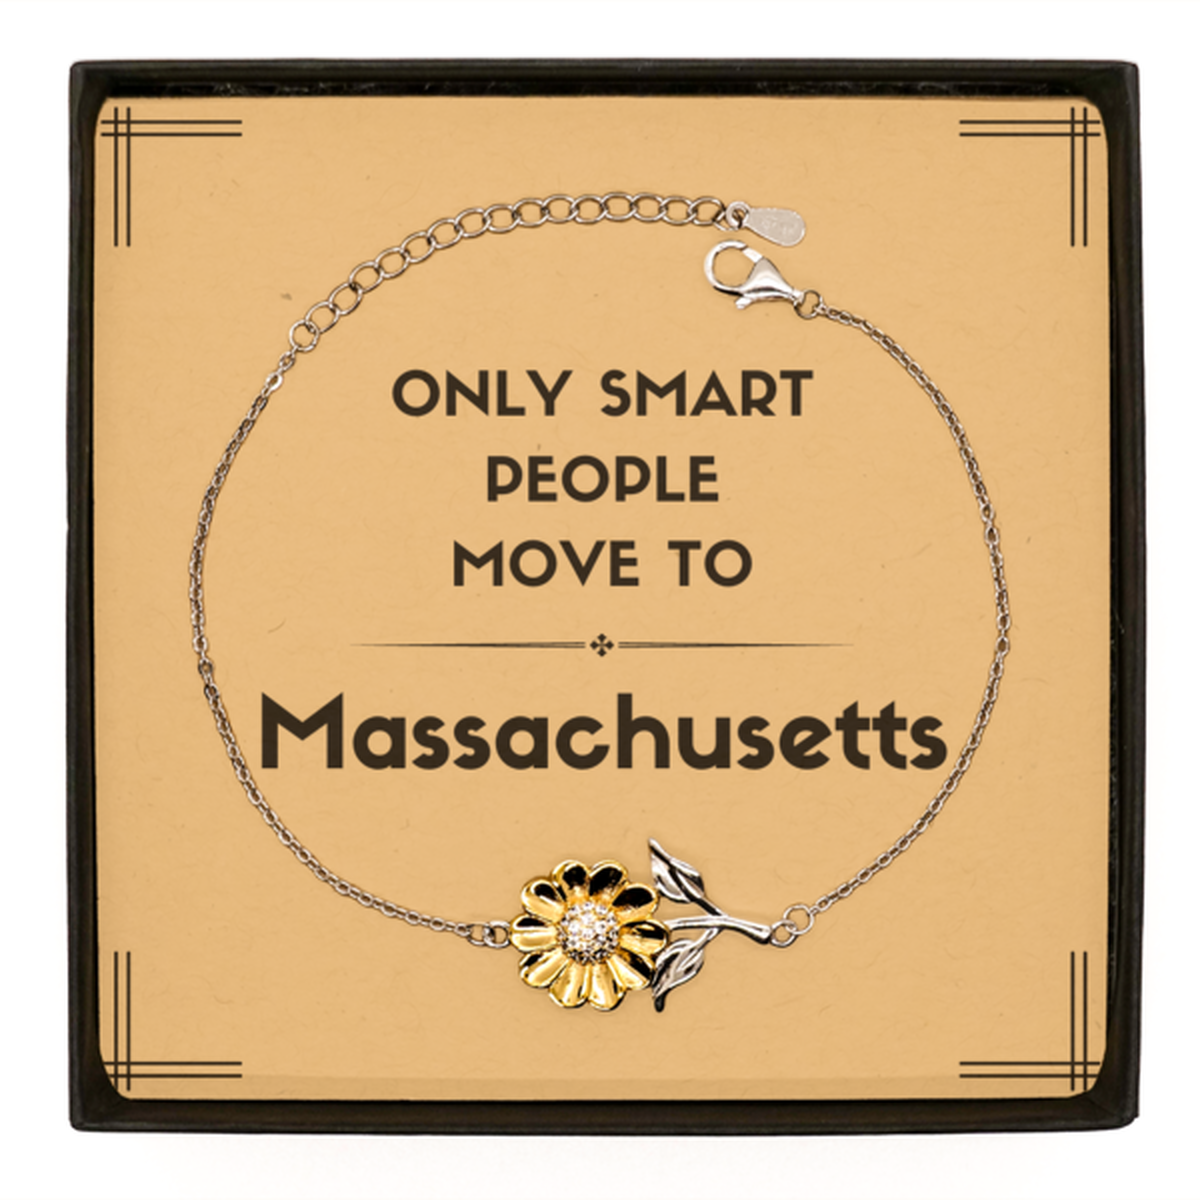 Only smart people move to Massachusetts Sunflower Bracelet, Message Card Gifts For Massachusetts, Move to Massachusetts Gifts for Friends Coworker Funny Saying Quote